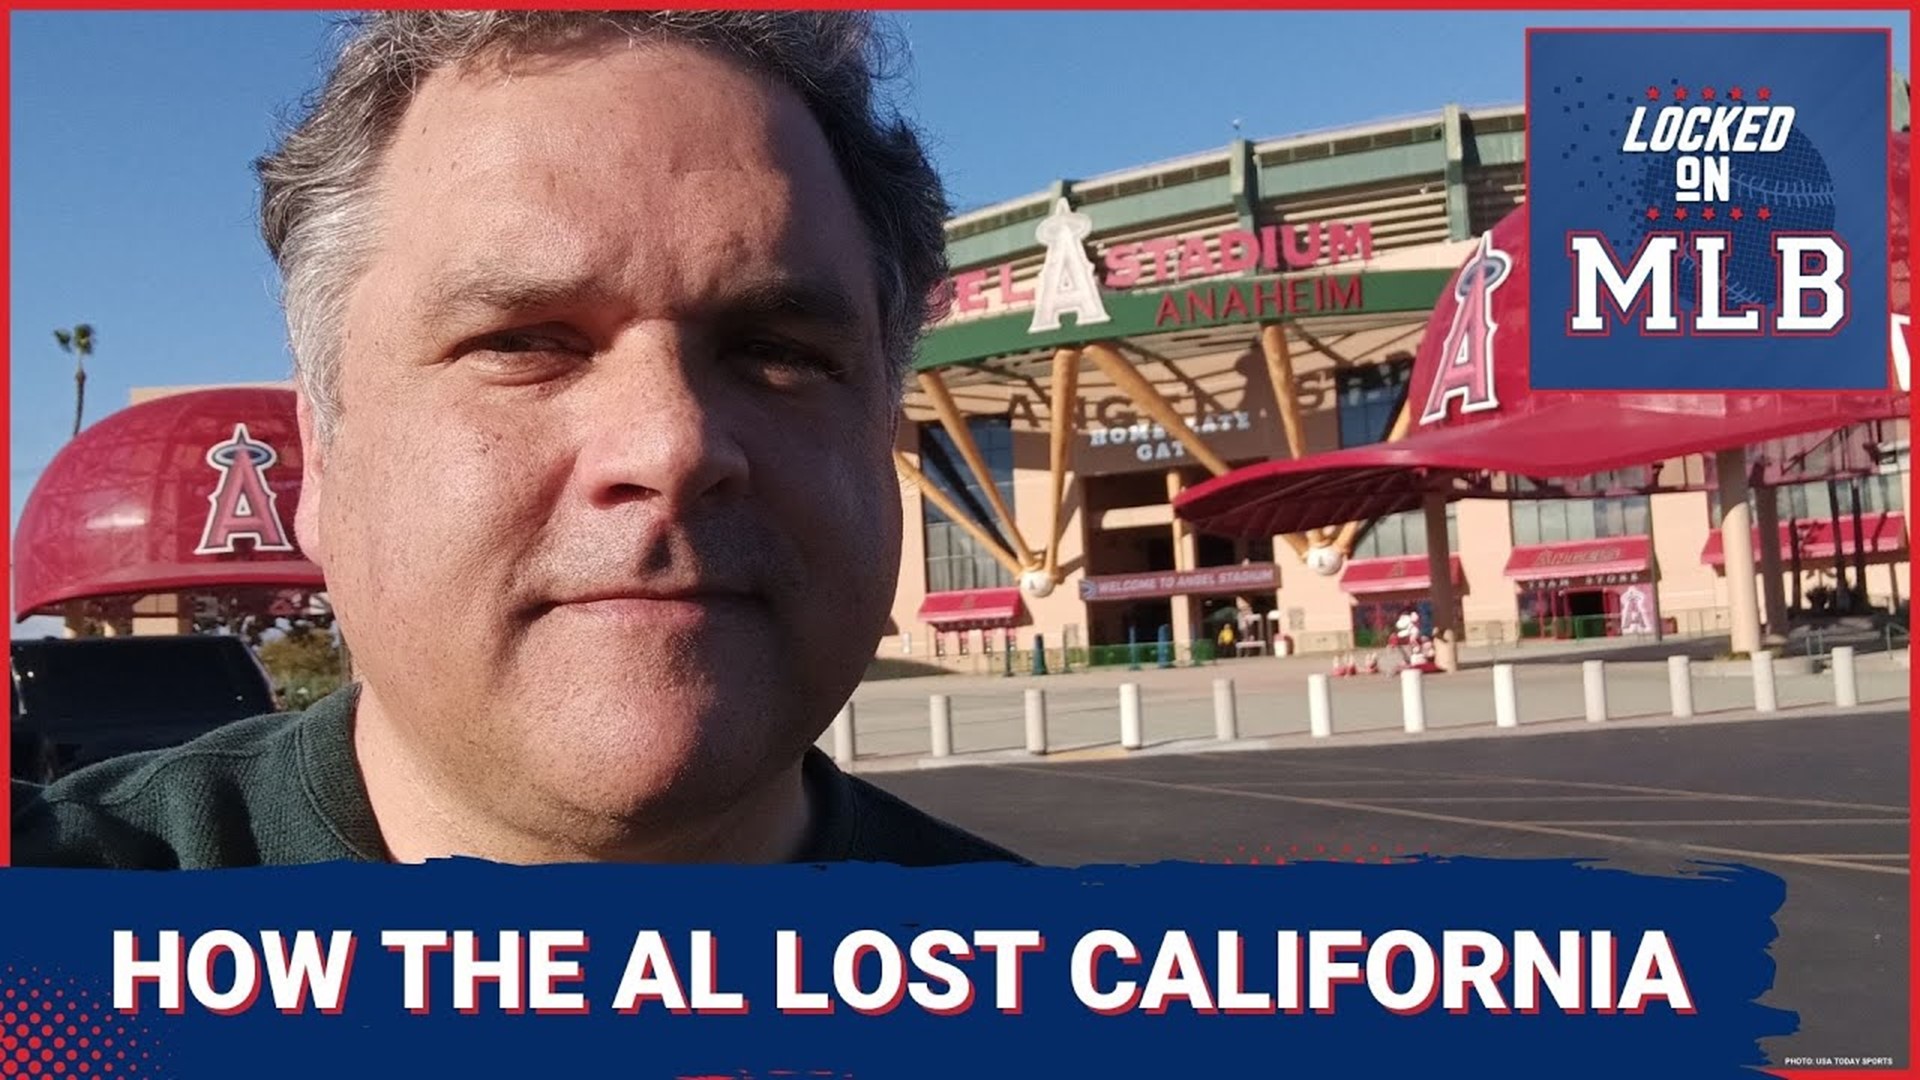 California is an NL dominated state. The Dodgers and Giants have the legends and play in the famous cities. The AL teams play outside the major cities.